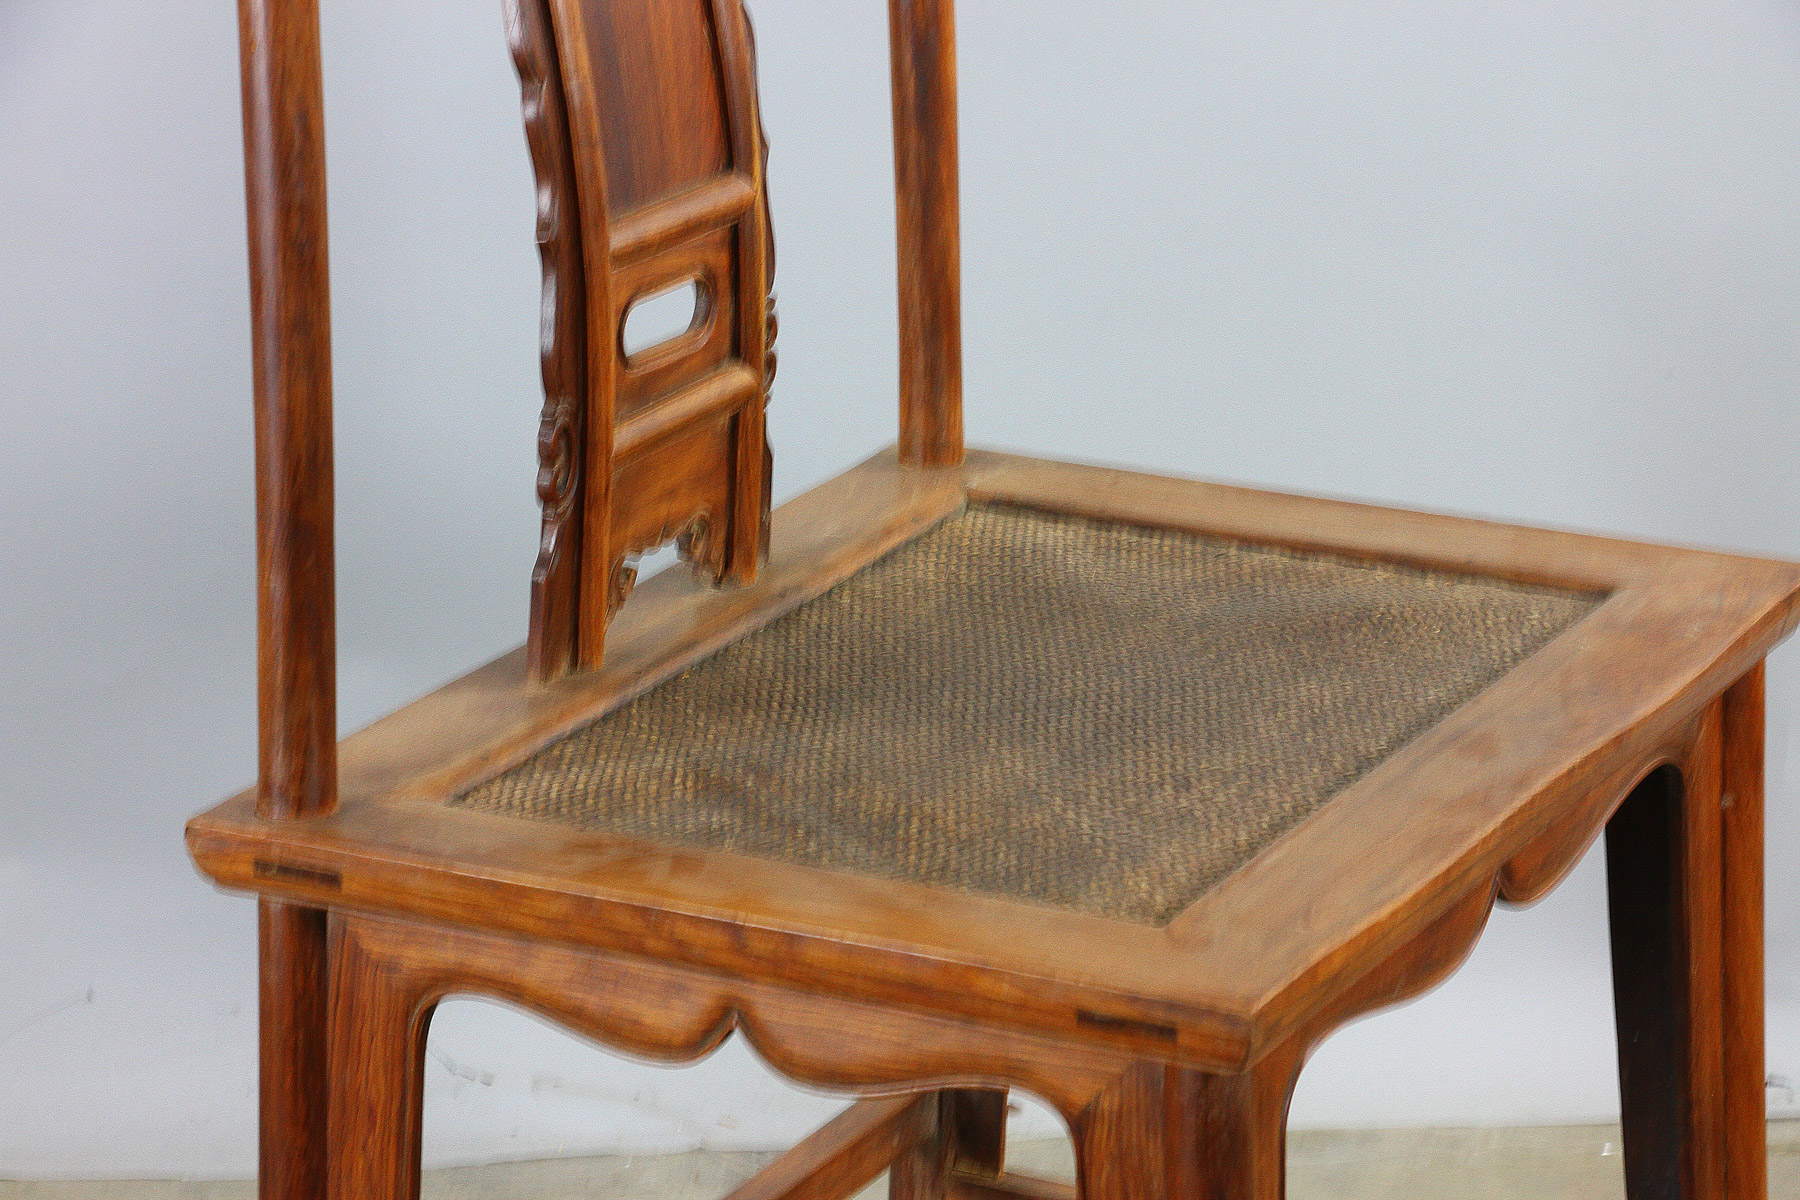 Chinese huali wood chair, 45" x 18" x 24". - Image 5 of 7